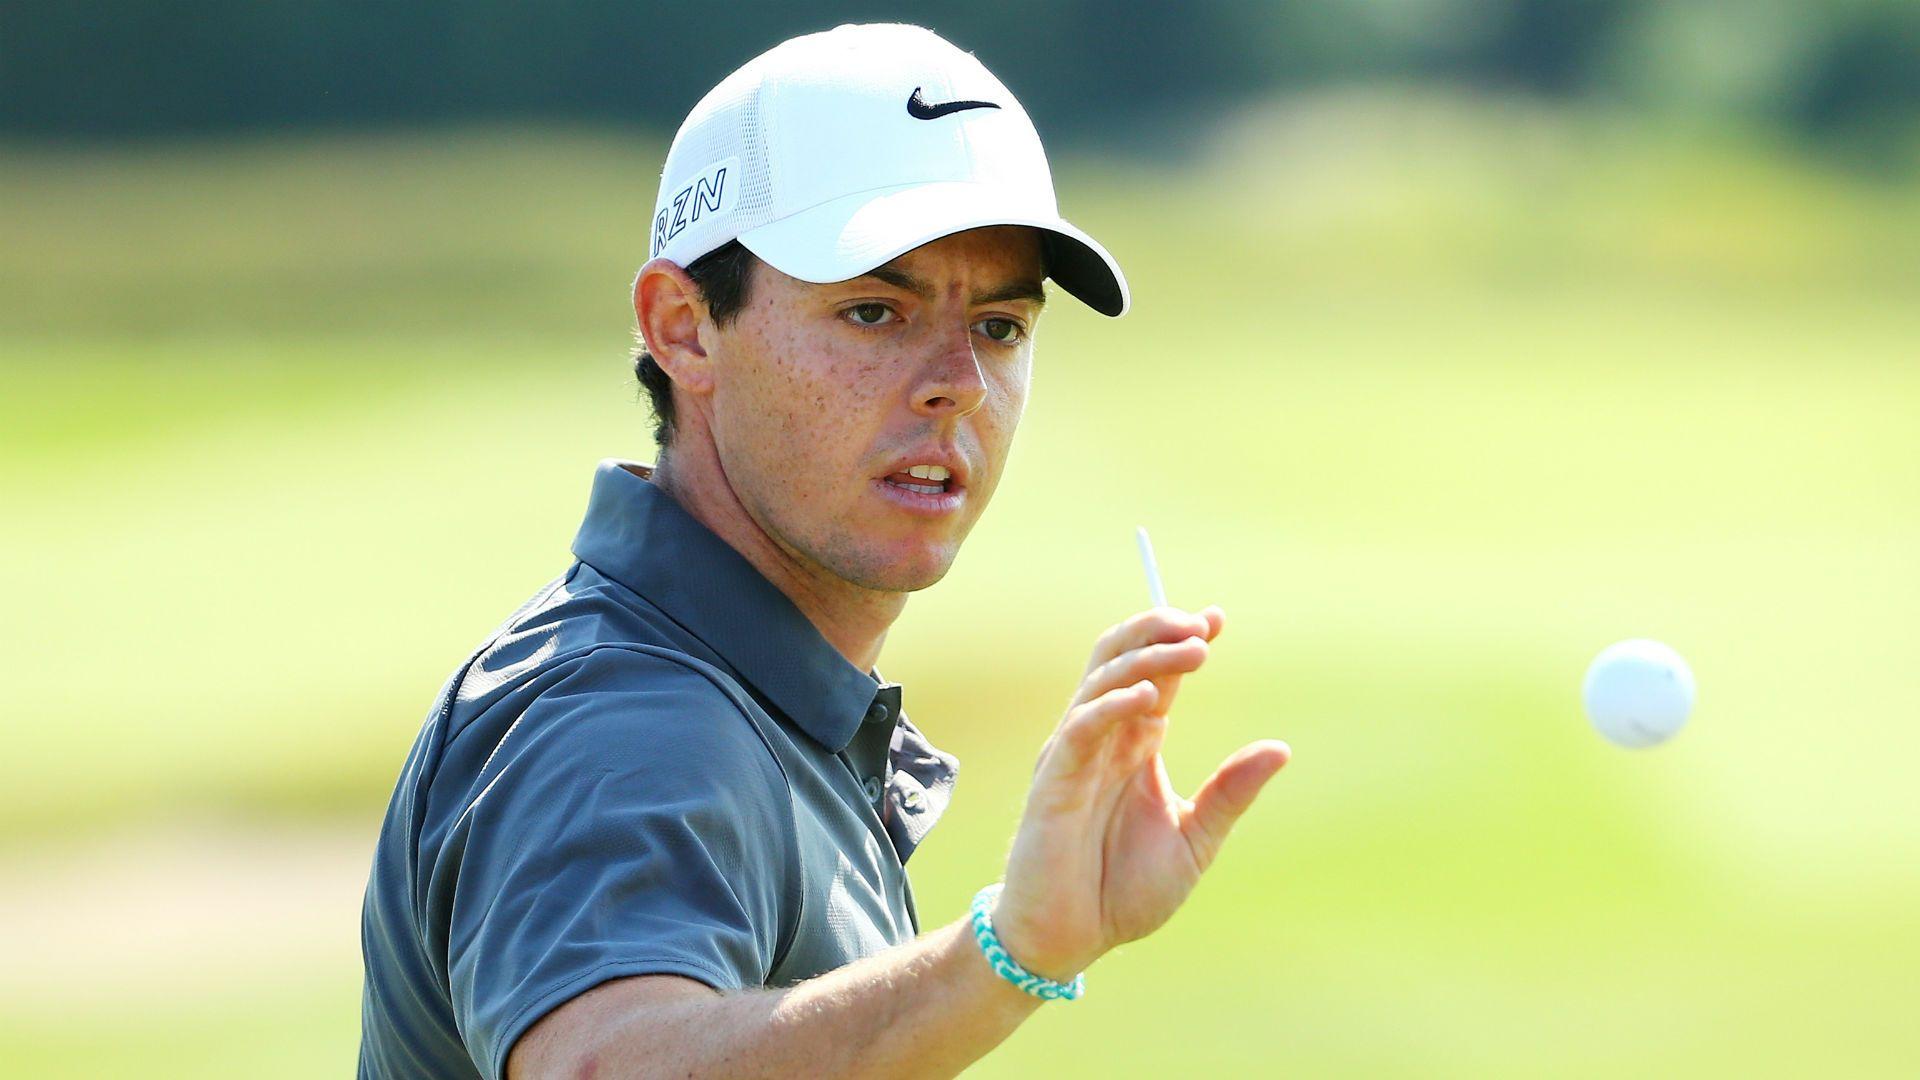 Rory McIlroy hopes to return to No. 1 in world golf rankings